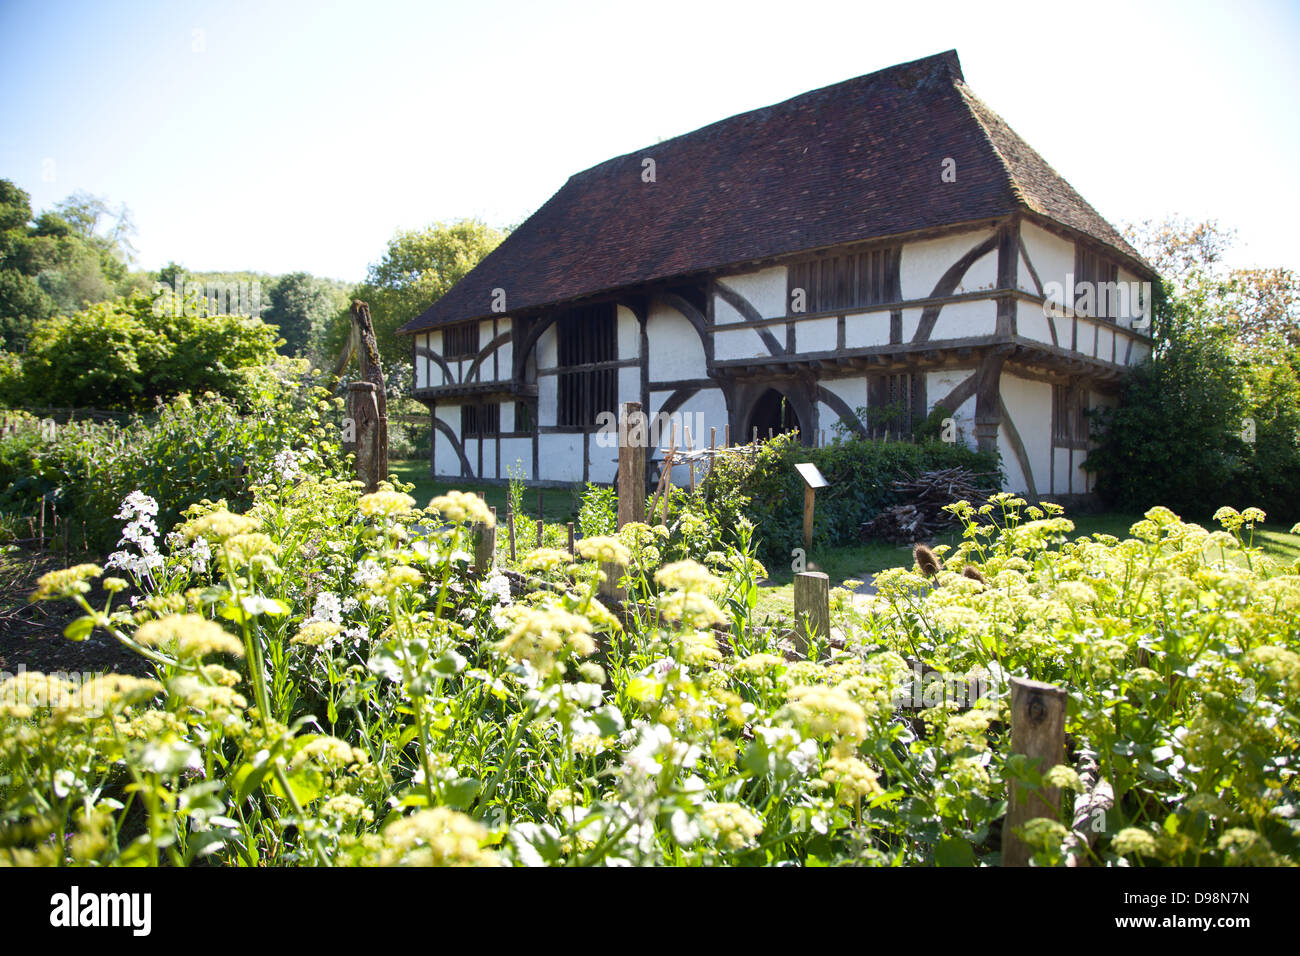 Exterior of Bayleaf - a timber-framed hall-house dating mainly from the early 15th century, as seen from the garden Stock Photo